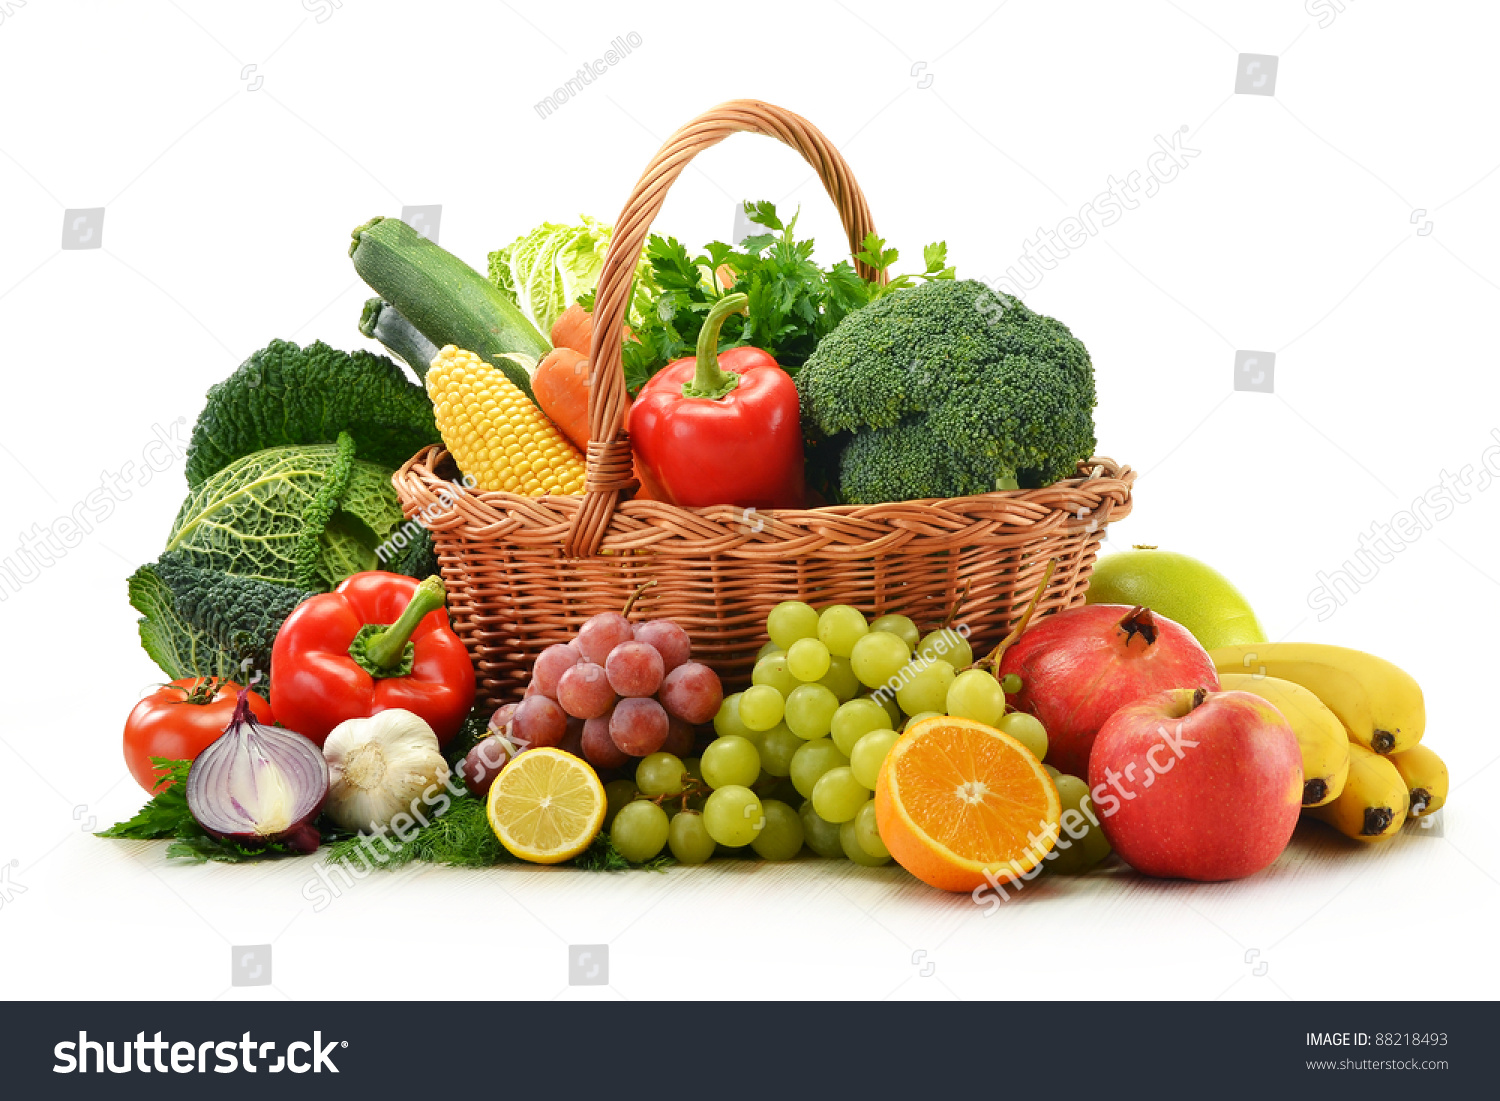 Composition with vegetables and fruits in wicker basket isolated on white #88218493